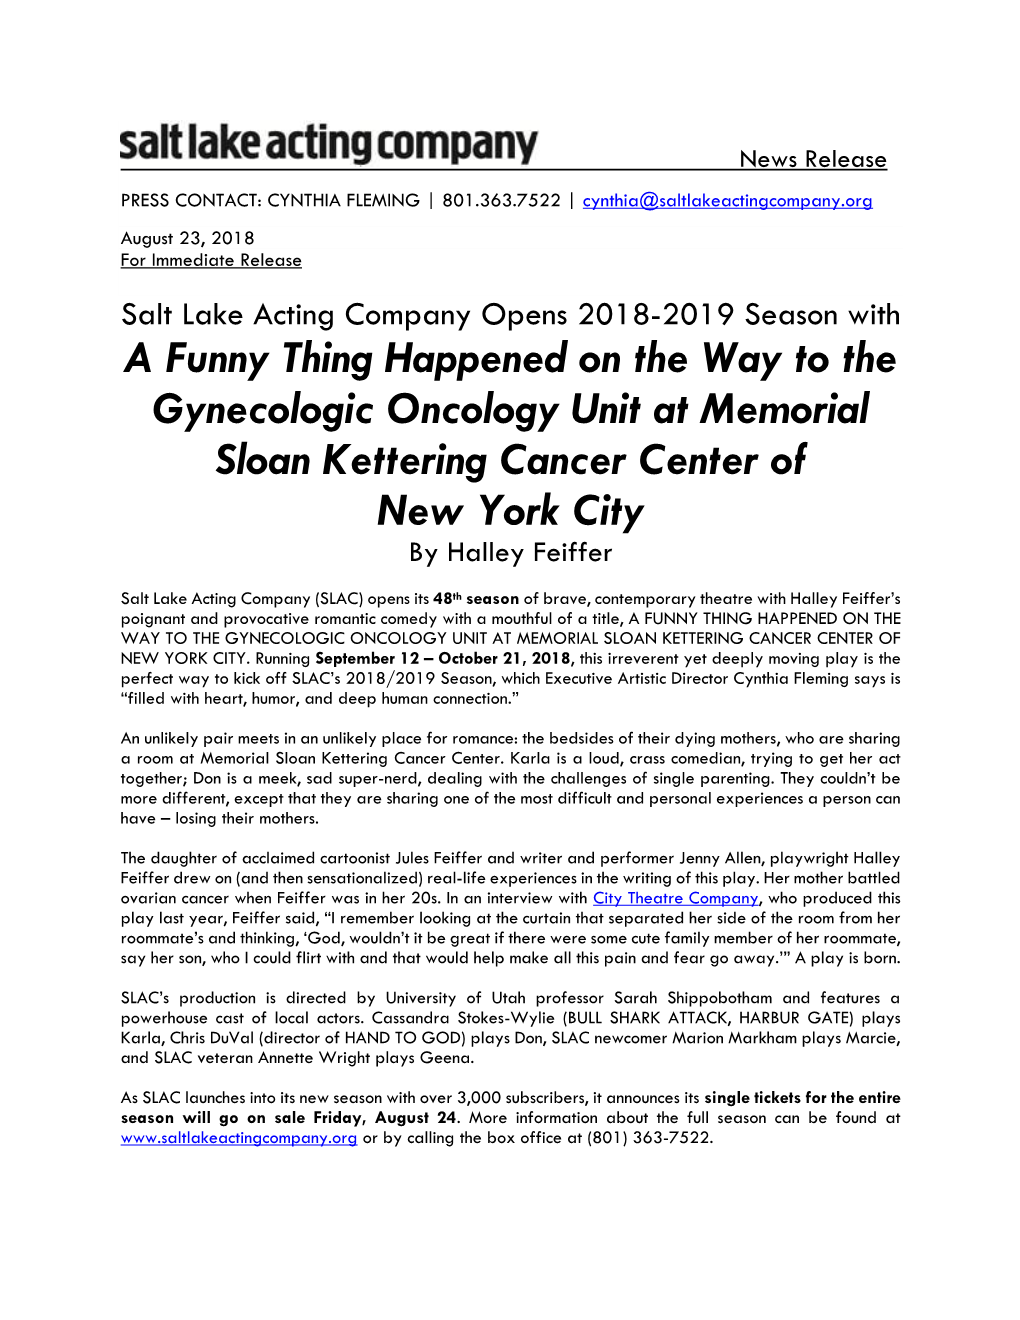 A Funny Thing Happened on the Way to the Gynecologic Oncology Unit at Memorial Sloan Kettering Cancer Center of New York City by Halley Feiffer